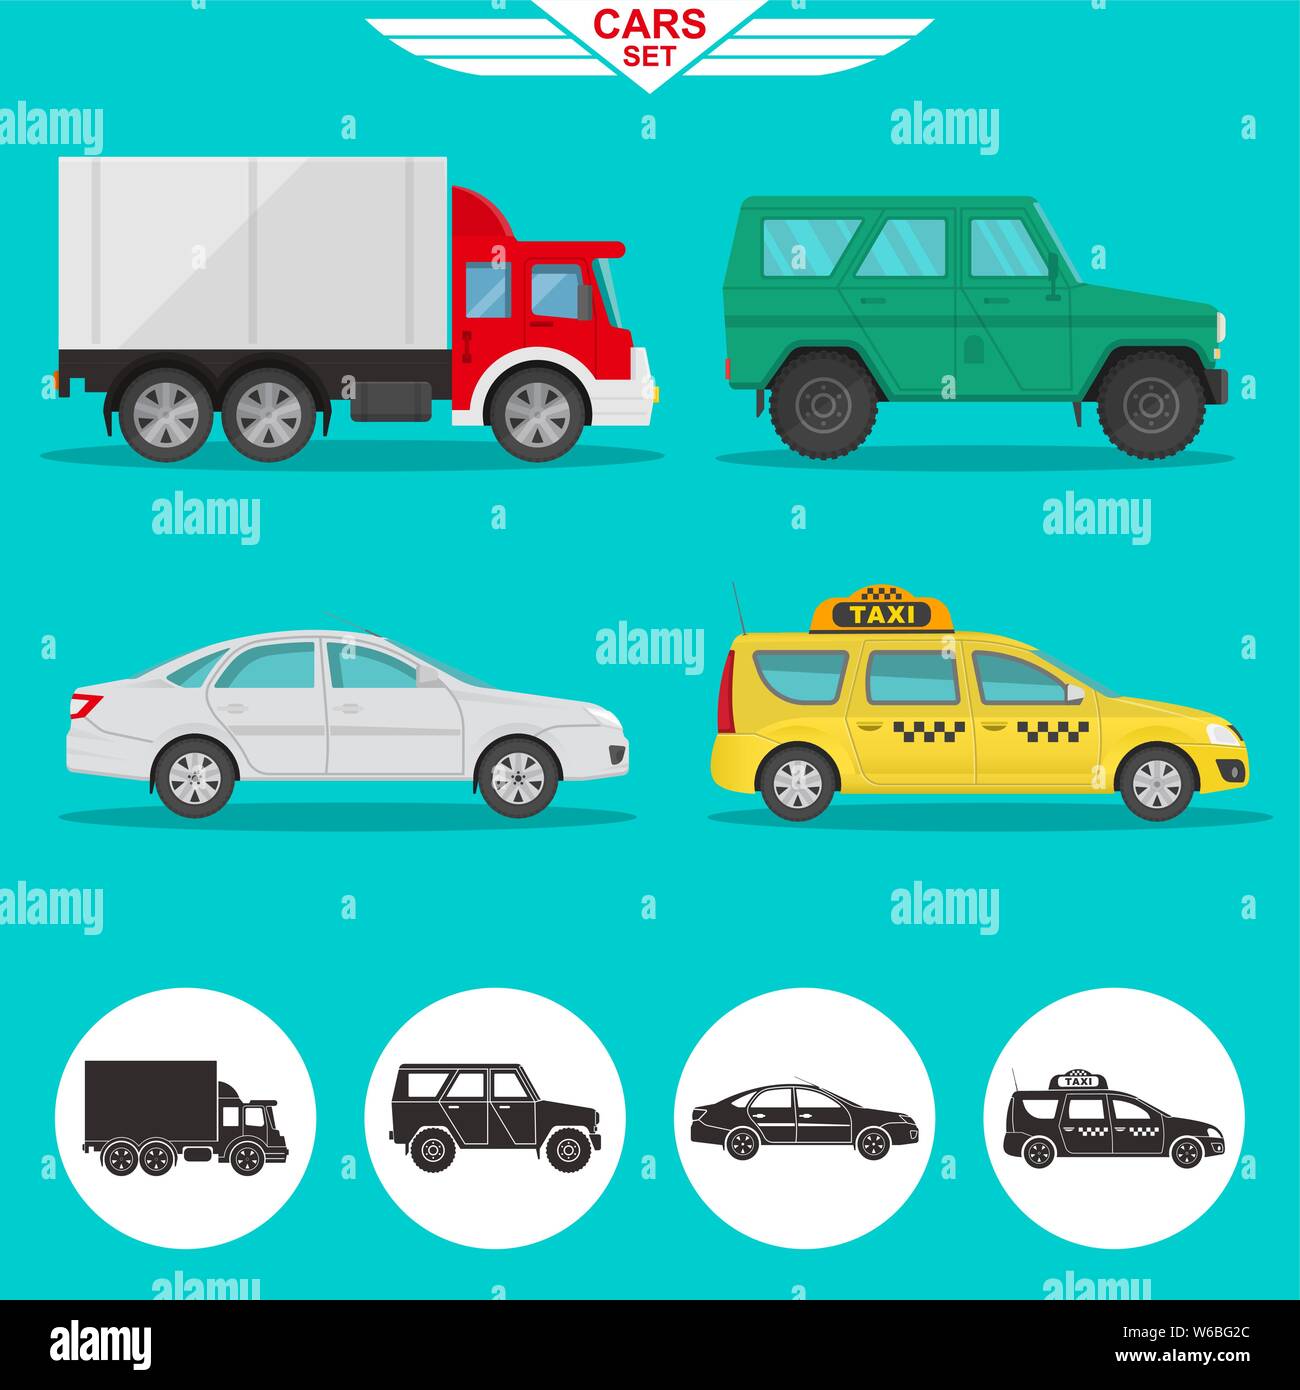 A set of vehicles with a shadow. Cargo van, SUV, car, motor cab. Icons of cars in flat style. Vector illustration. Design elements. Stock Vector